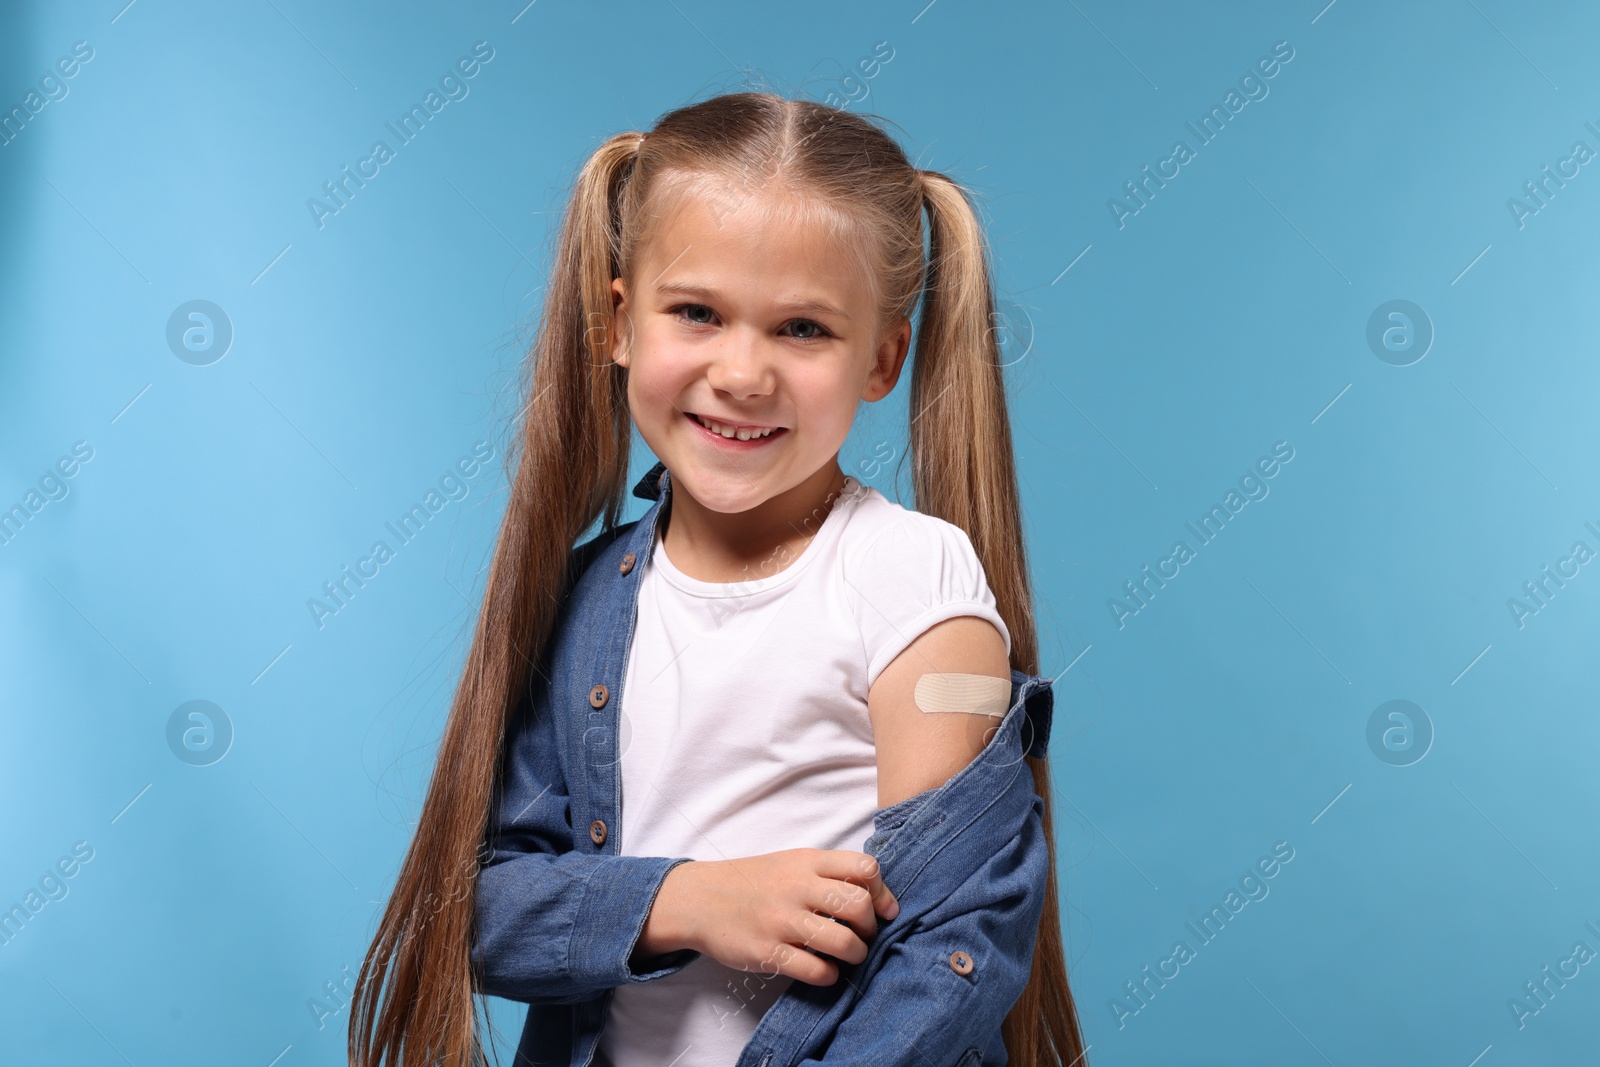 Photo of Happy girl with sticking plaster on arm after vaccination against light blue background